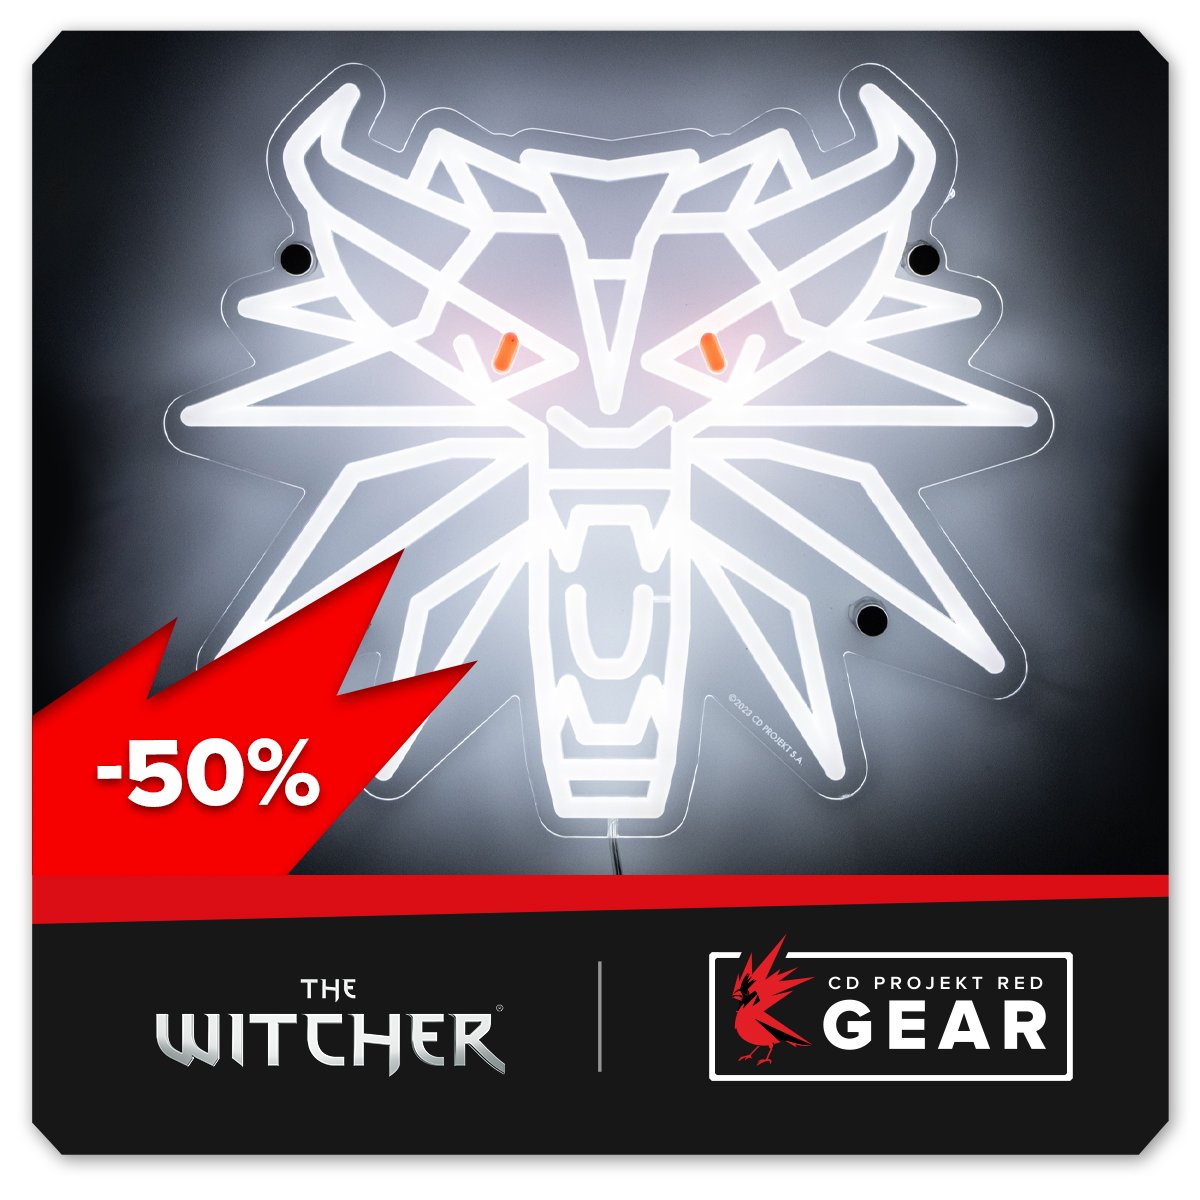 Illuminate your wolf’s den or witcher school with #TheWitcher White Wolf LED Wall Art — the perfect wall accessory for any professional monster slayer. Get it now for 50% off! @WitcherGame gear.cdprojektred.com/products/the-w…